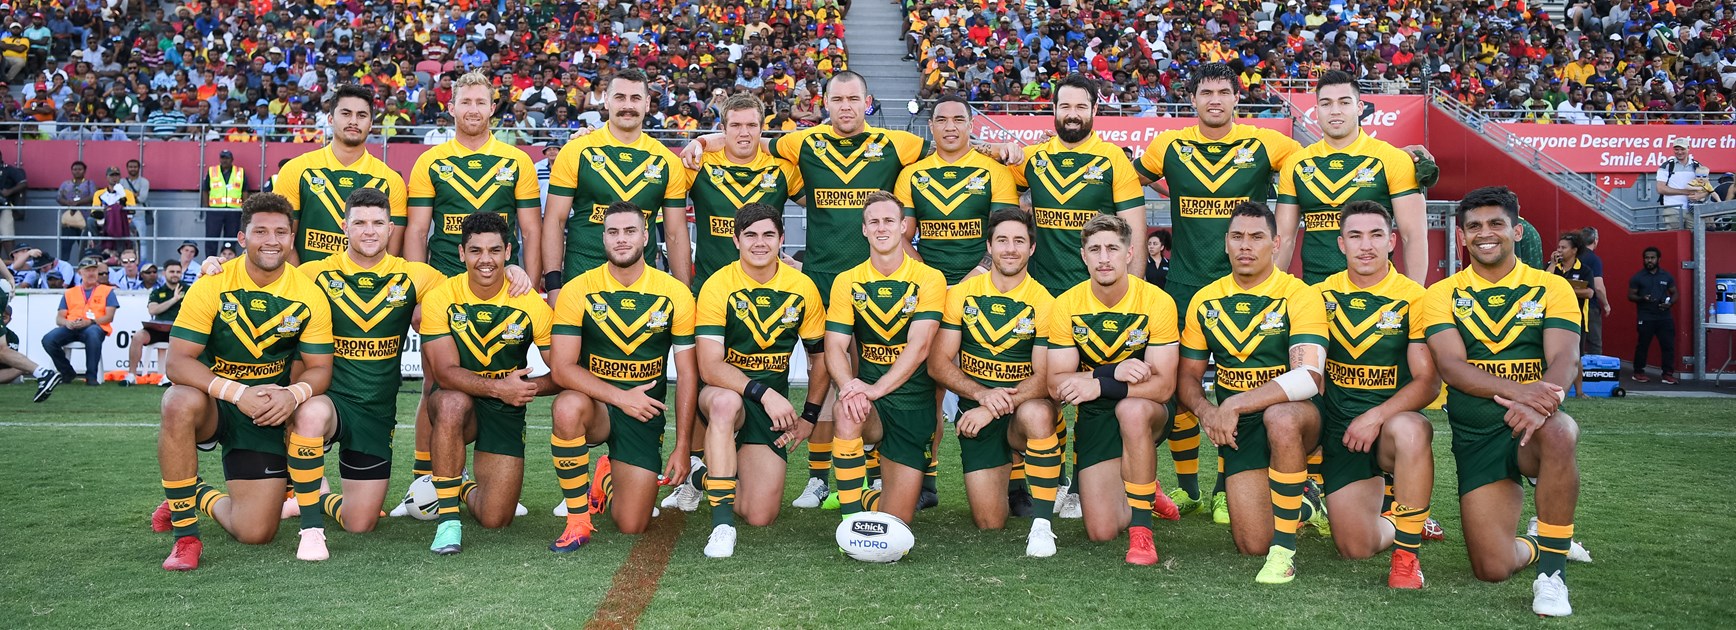 As it happened: PNG PM's XIII v Australia PM's XIII